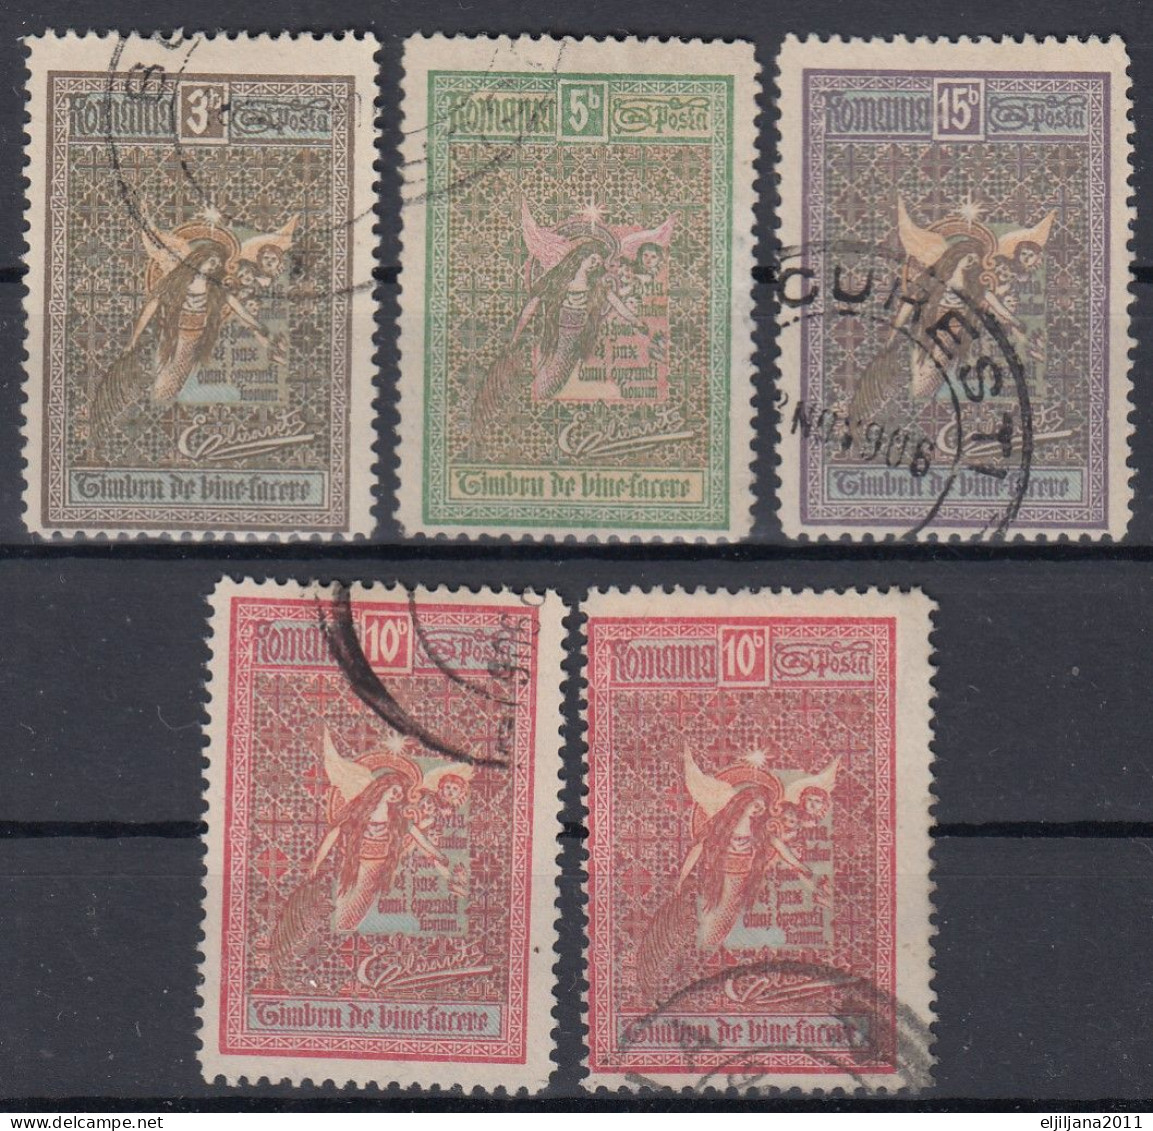 ⁕ Romania 1906 ⁕ Wohlfahrt Mi.173-176 Charity Issue ⁕ 5v Used - Used Stamps